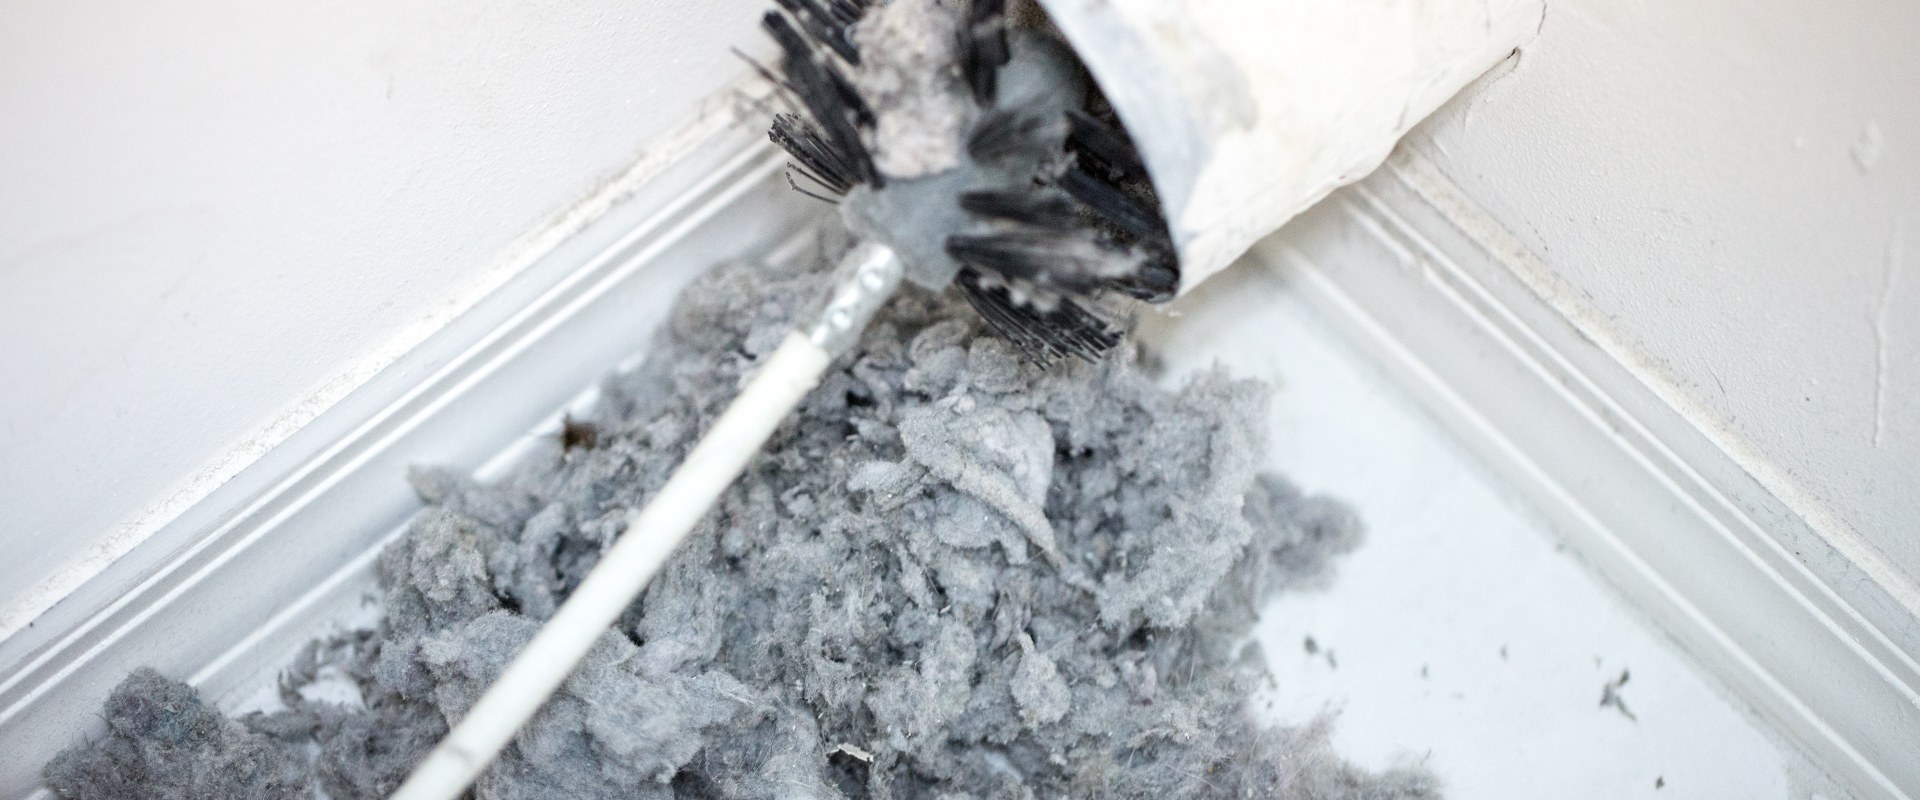 Should I Clean My Dryer Vent Myself or Hire a Professional Service?